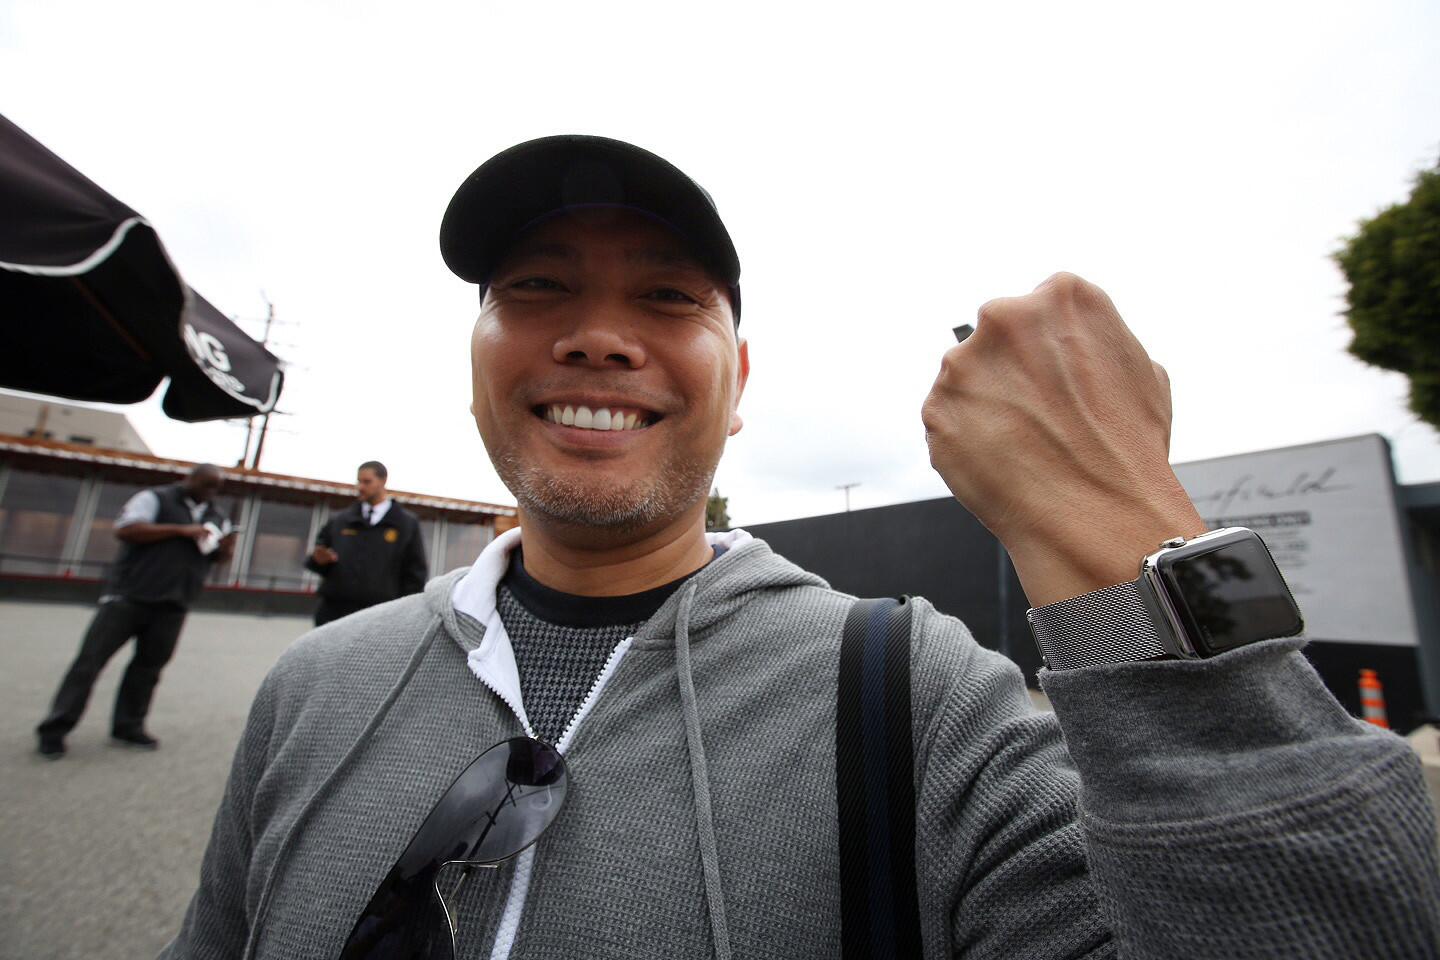 Apple Watch goes on sale in West Hollywood